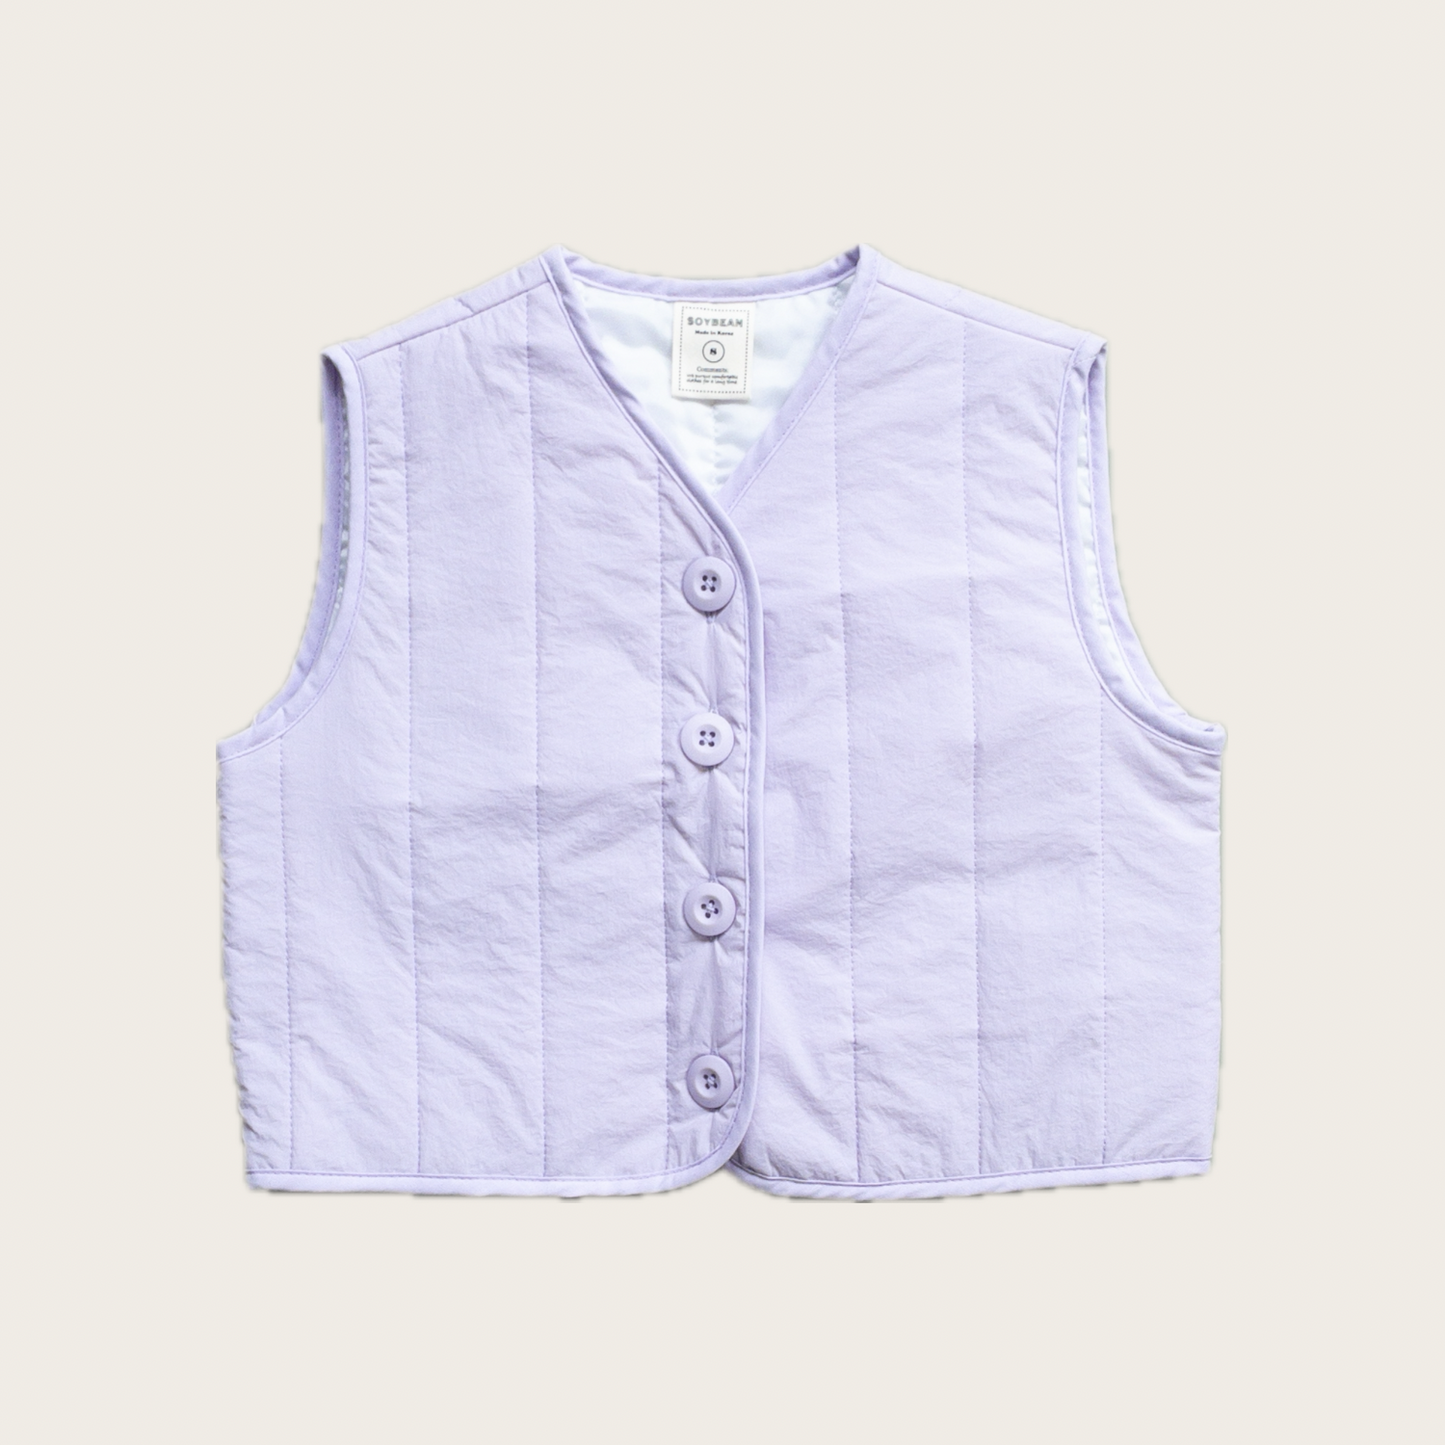 Lilac Quilted Vest